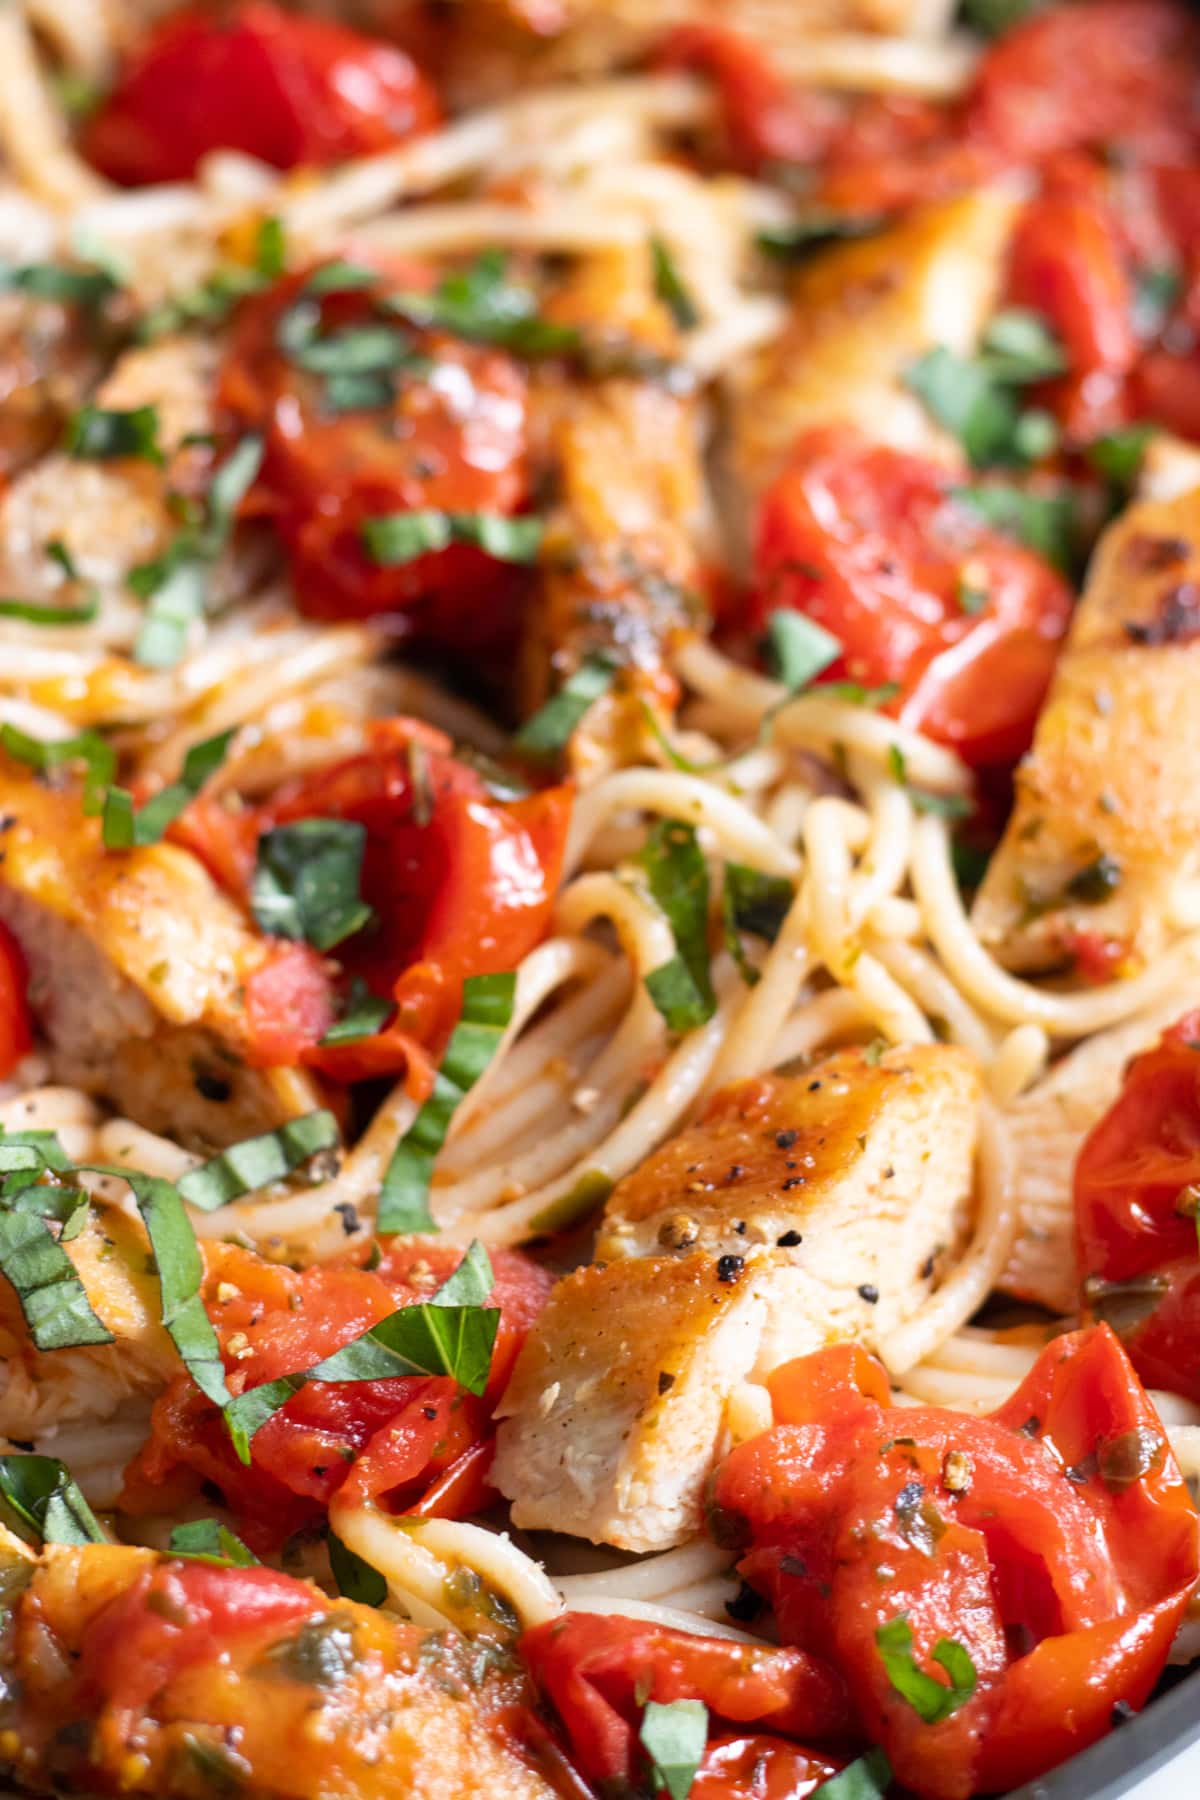 Cooked spaghetti mixed with pan-fried chicken slices, burst cherry tomatoes, and freshly sliced basil.